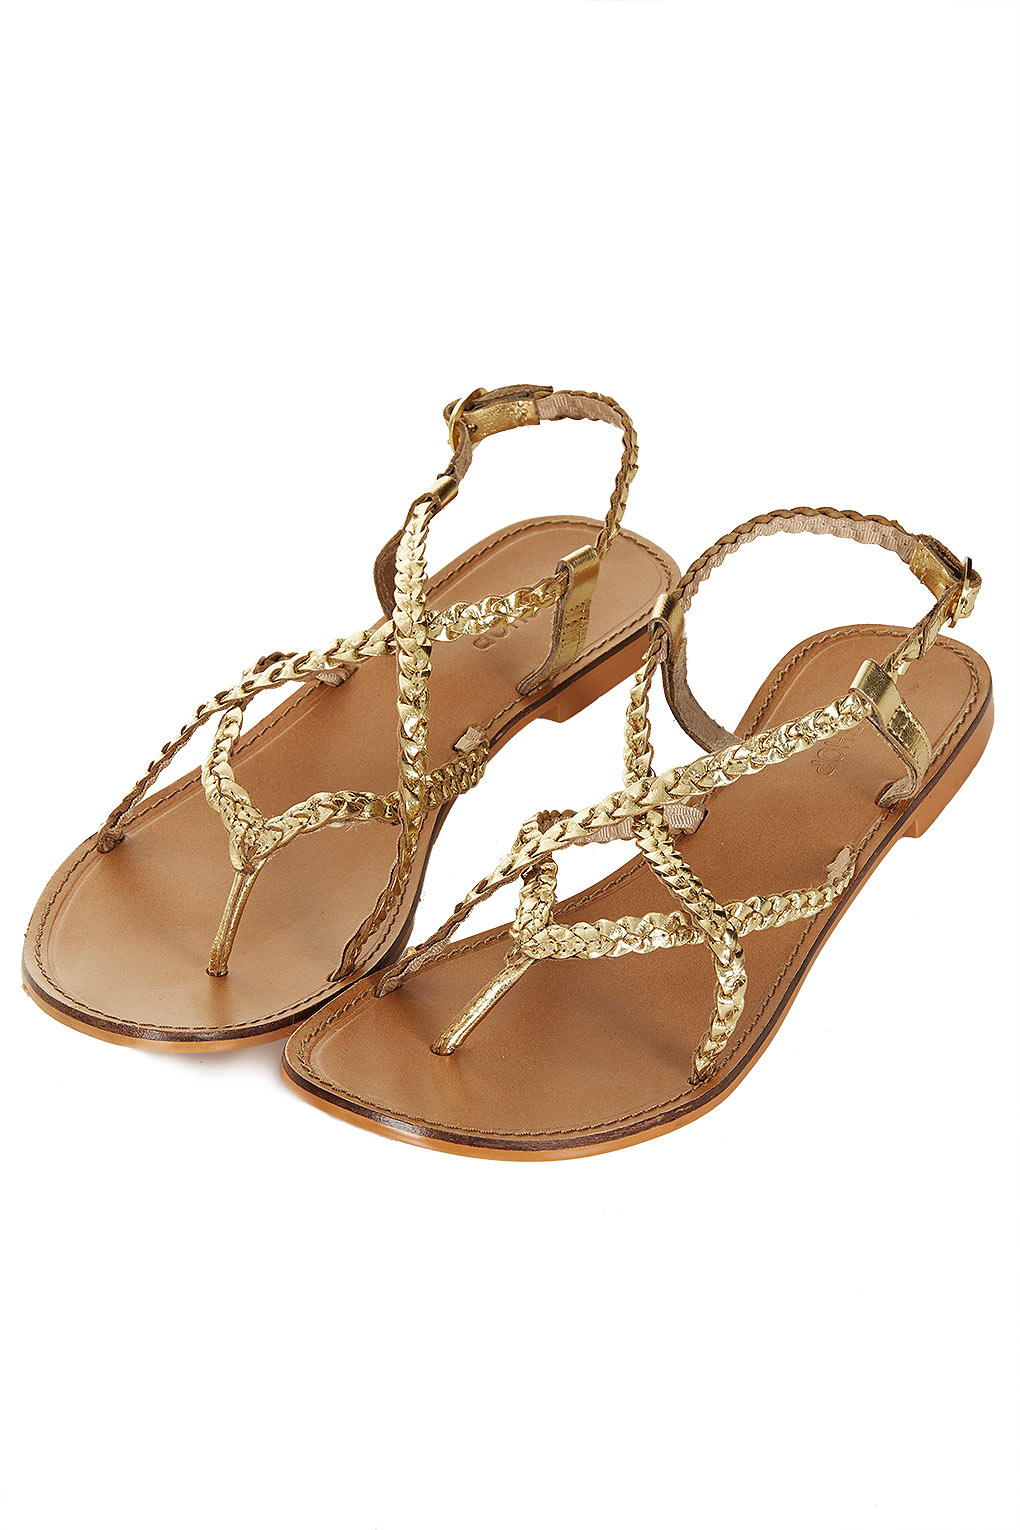 TOPSHOP Plaited Sandals in Gold 